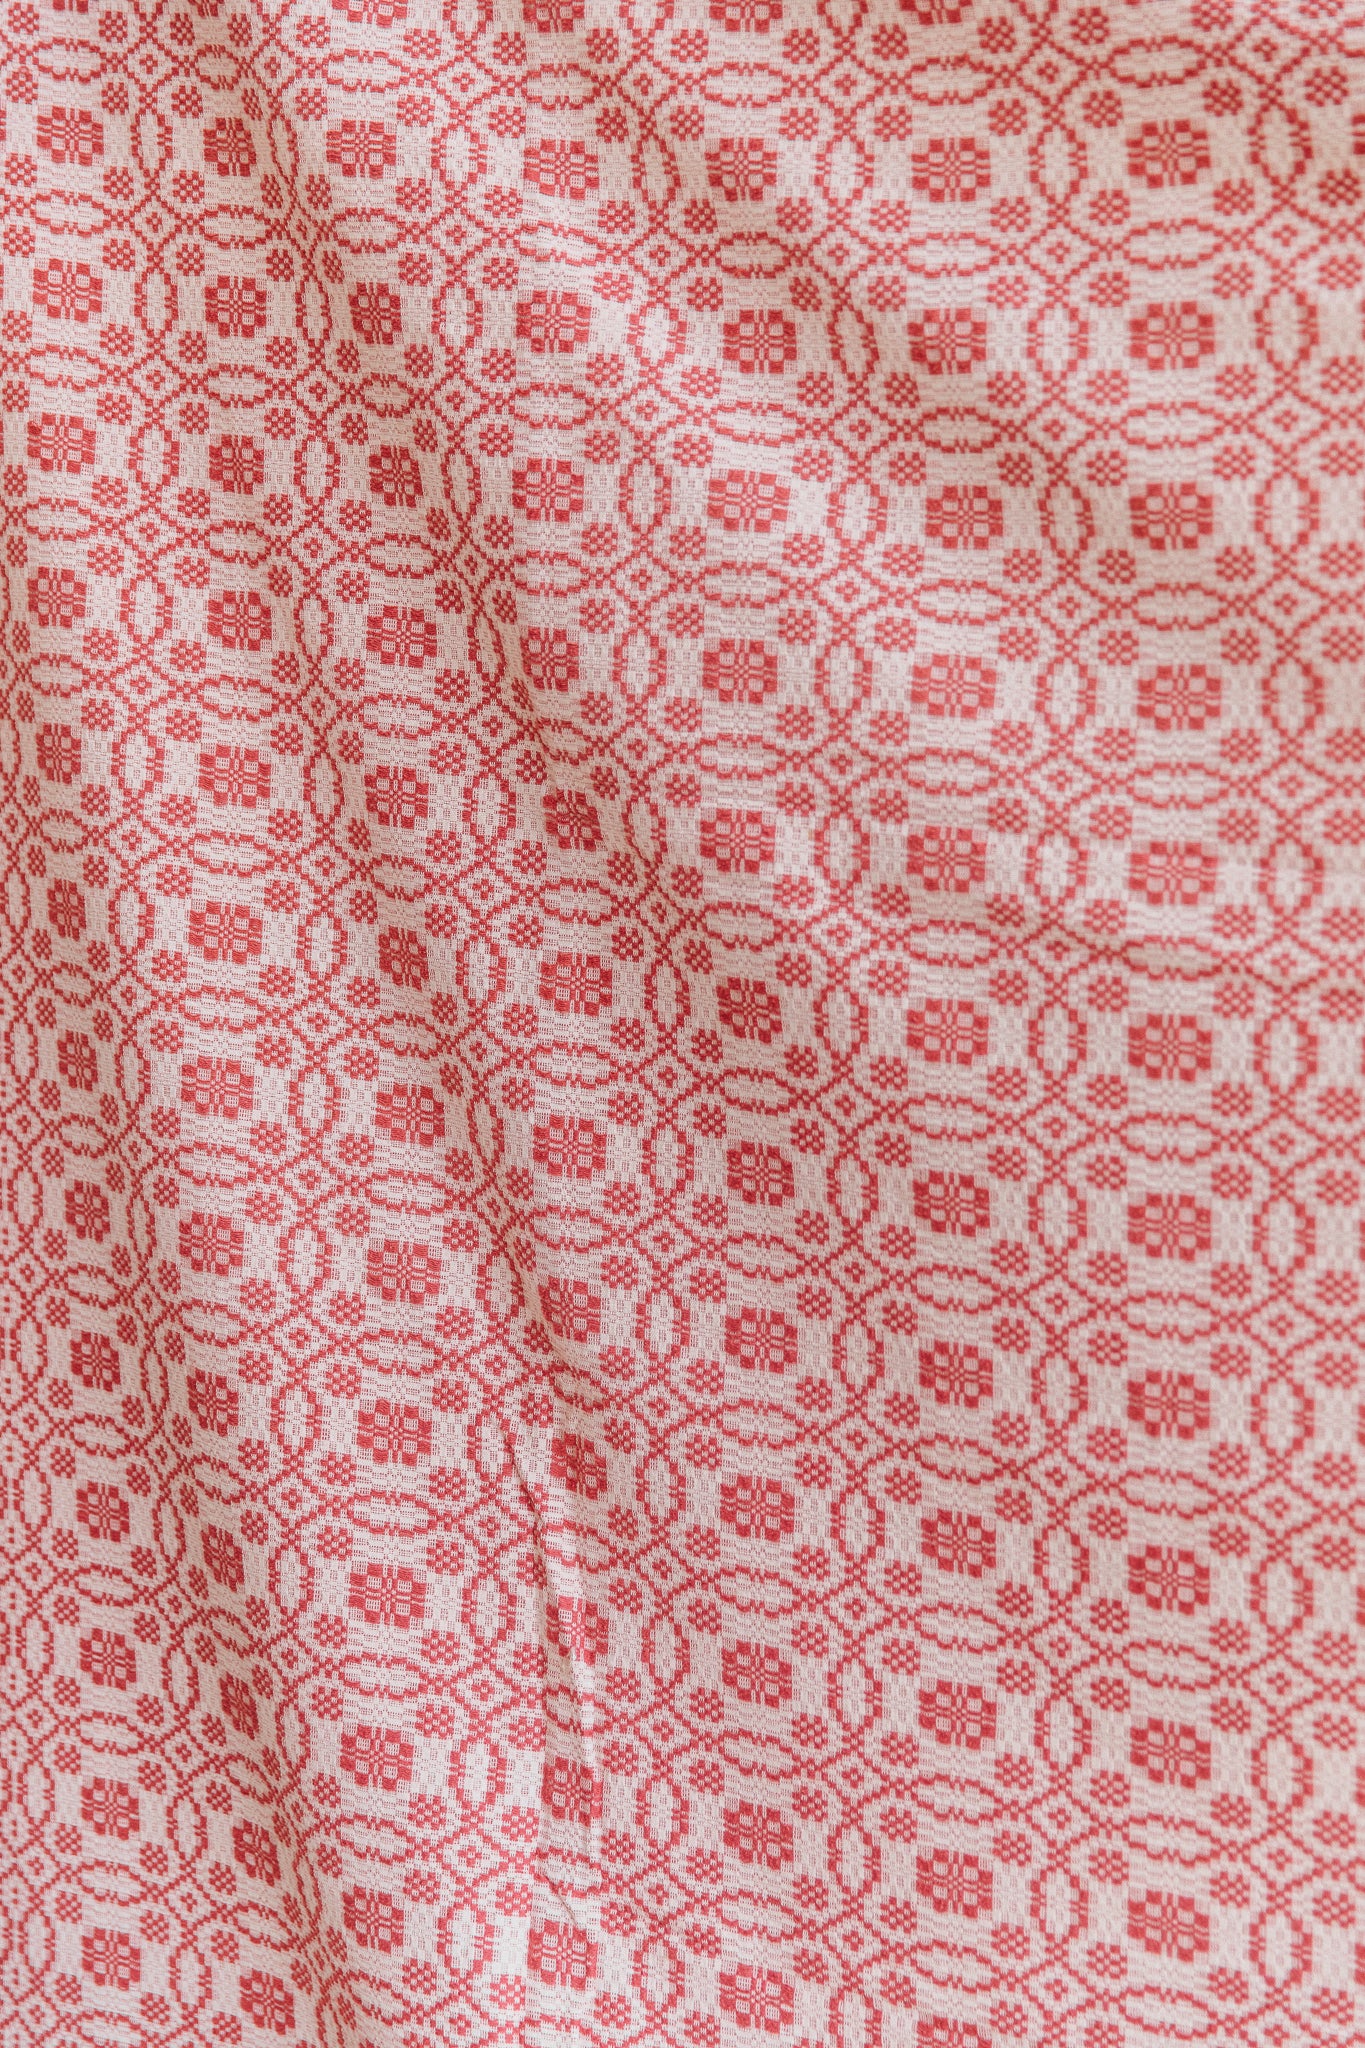 Reproduction Pink Whig Rose Coverlet by Goodwin